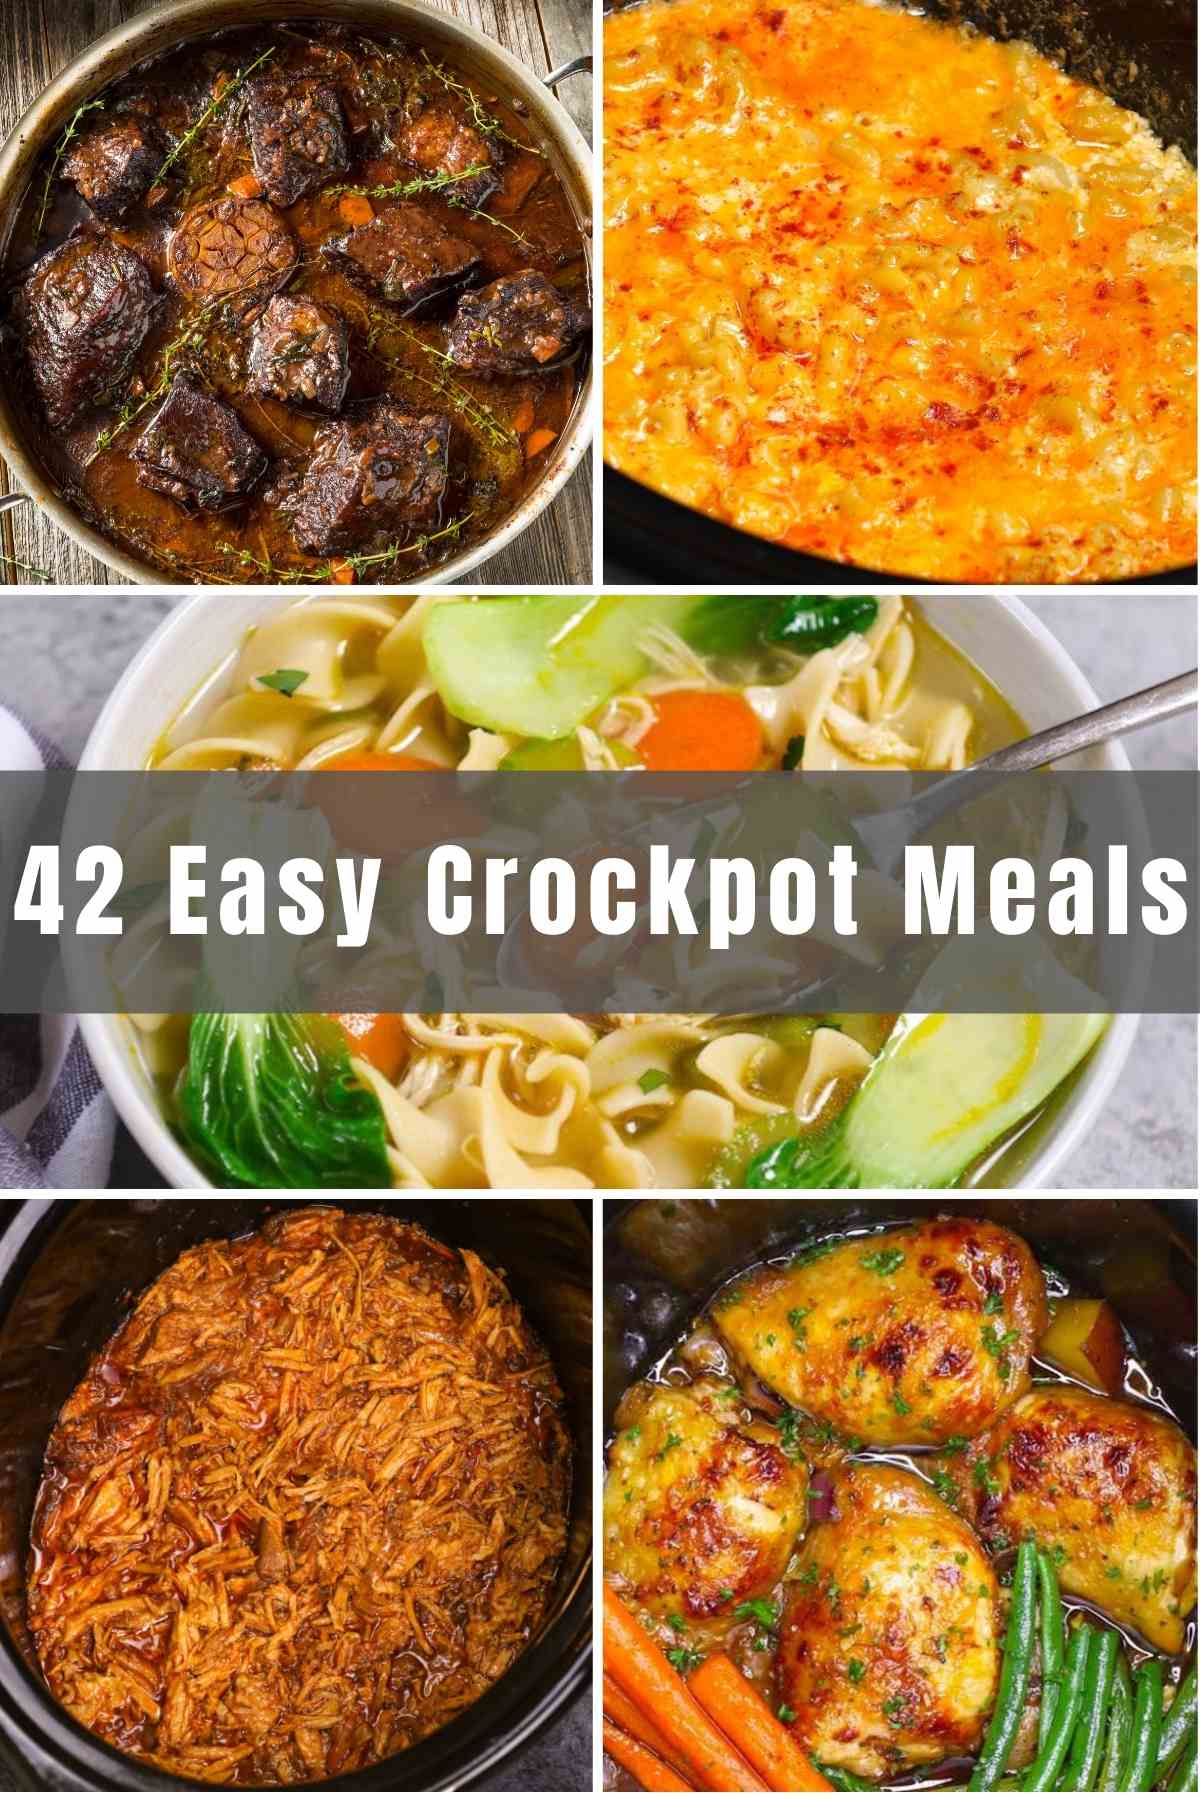 Whether you’re meal-prepping for the week, or loading up the crockpot for a Sunday pot roast, you really can’t deny how super-convenient crockpots can be. We’ve collected an extensive list of our favorite Easy Crockpot Meals, as well as some tips and tricks for fantastic results.